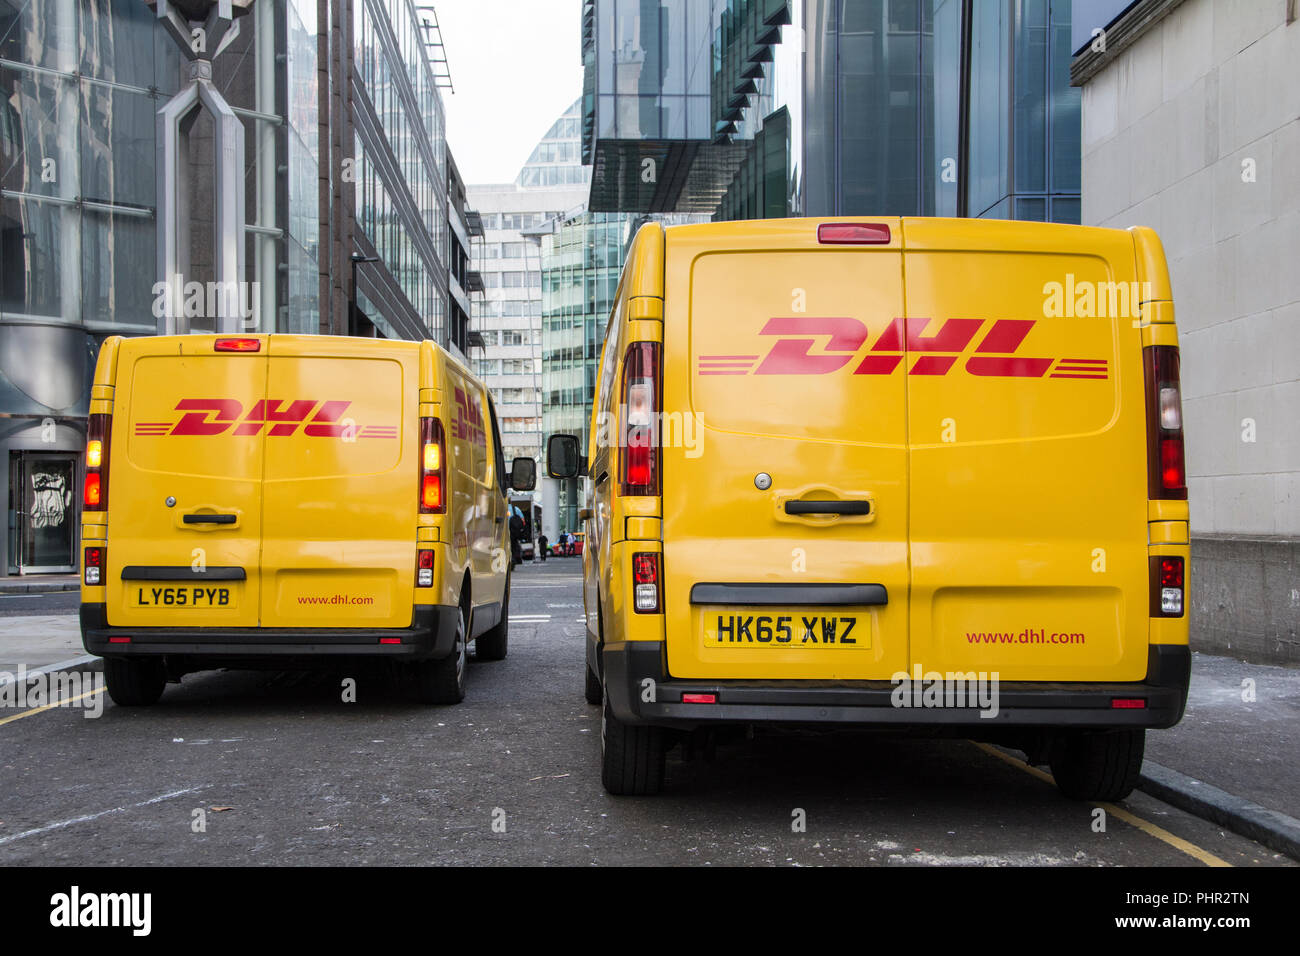 Two DHL Courier vans in the City of London, UK Stock Photo - Alamy